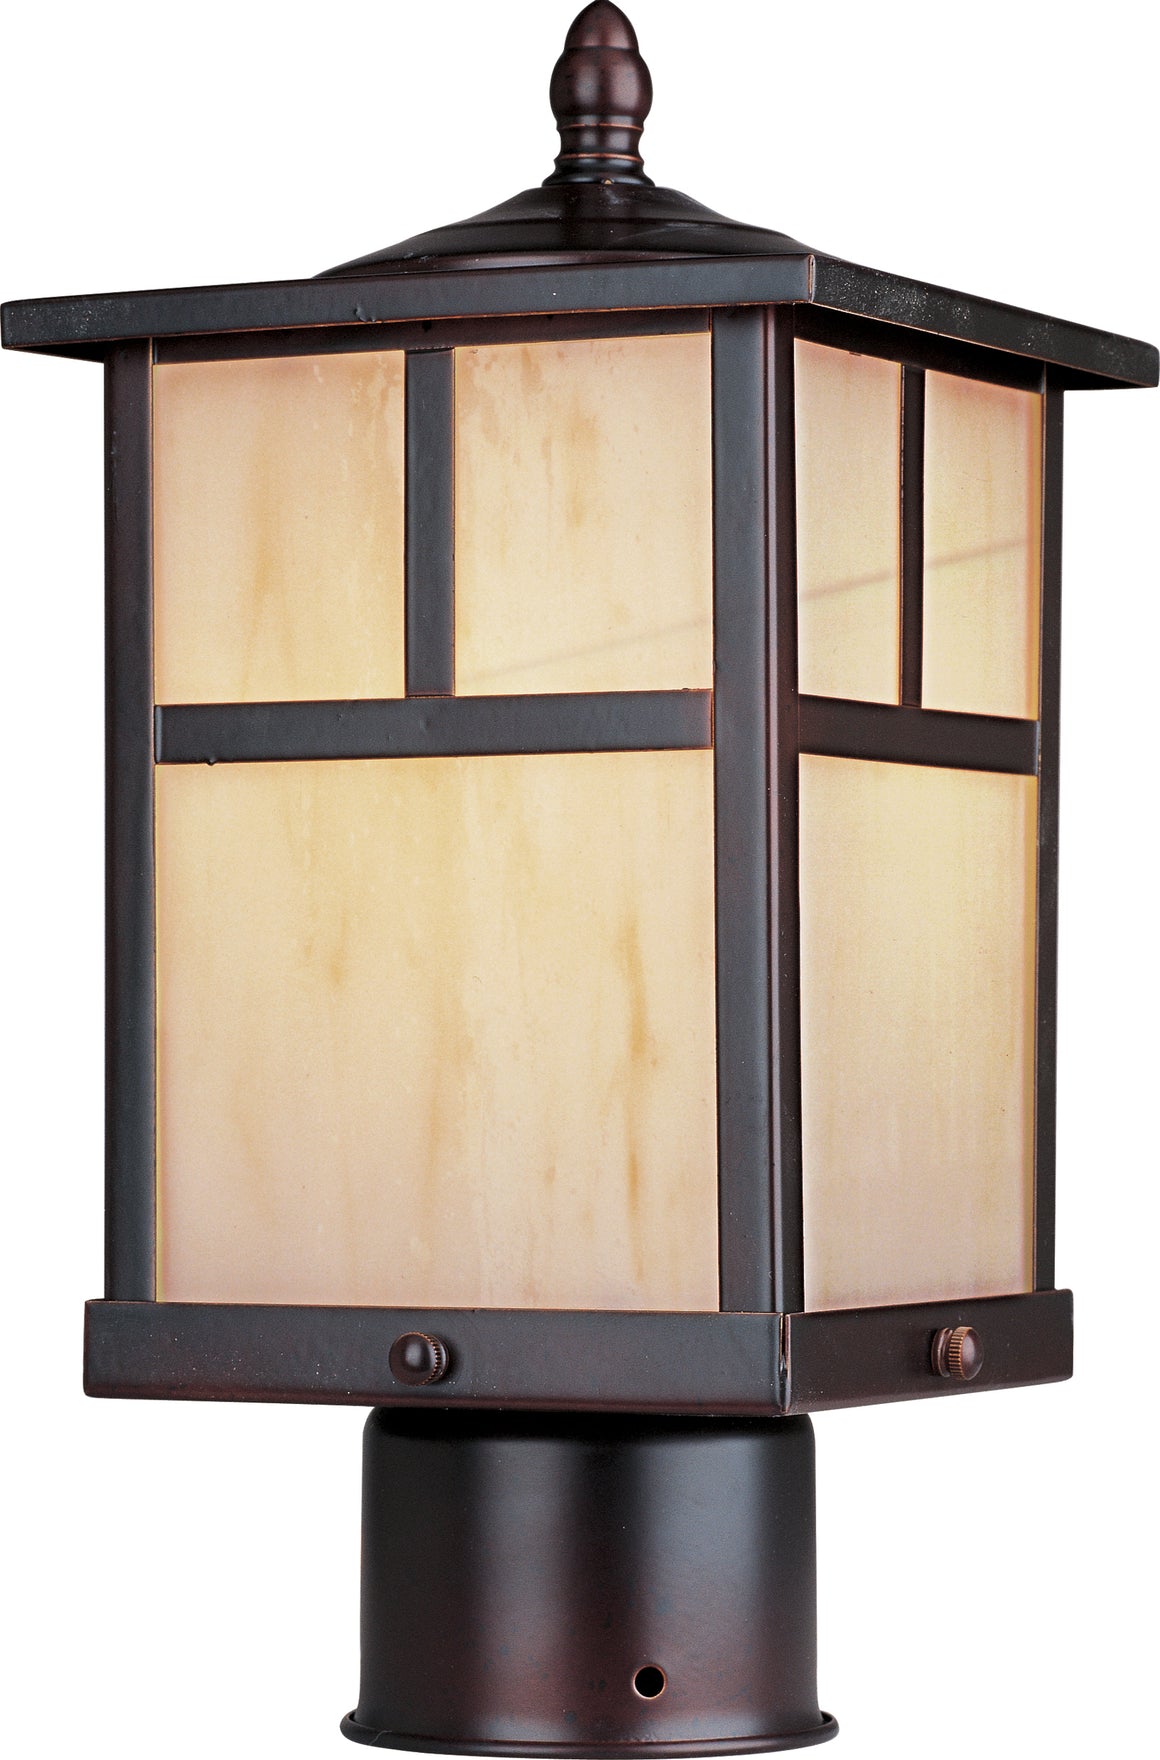 Coldwater LED 1-Light Outdoor Pole/Post Lantern